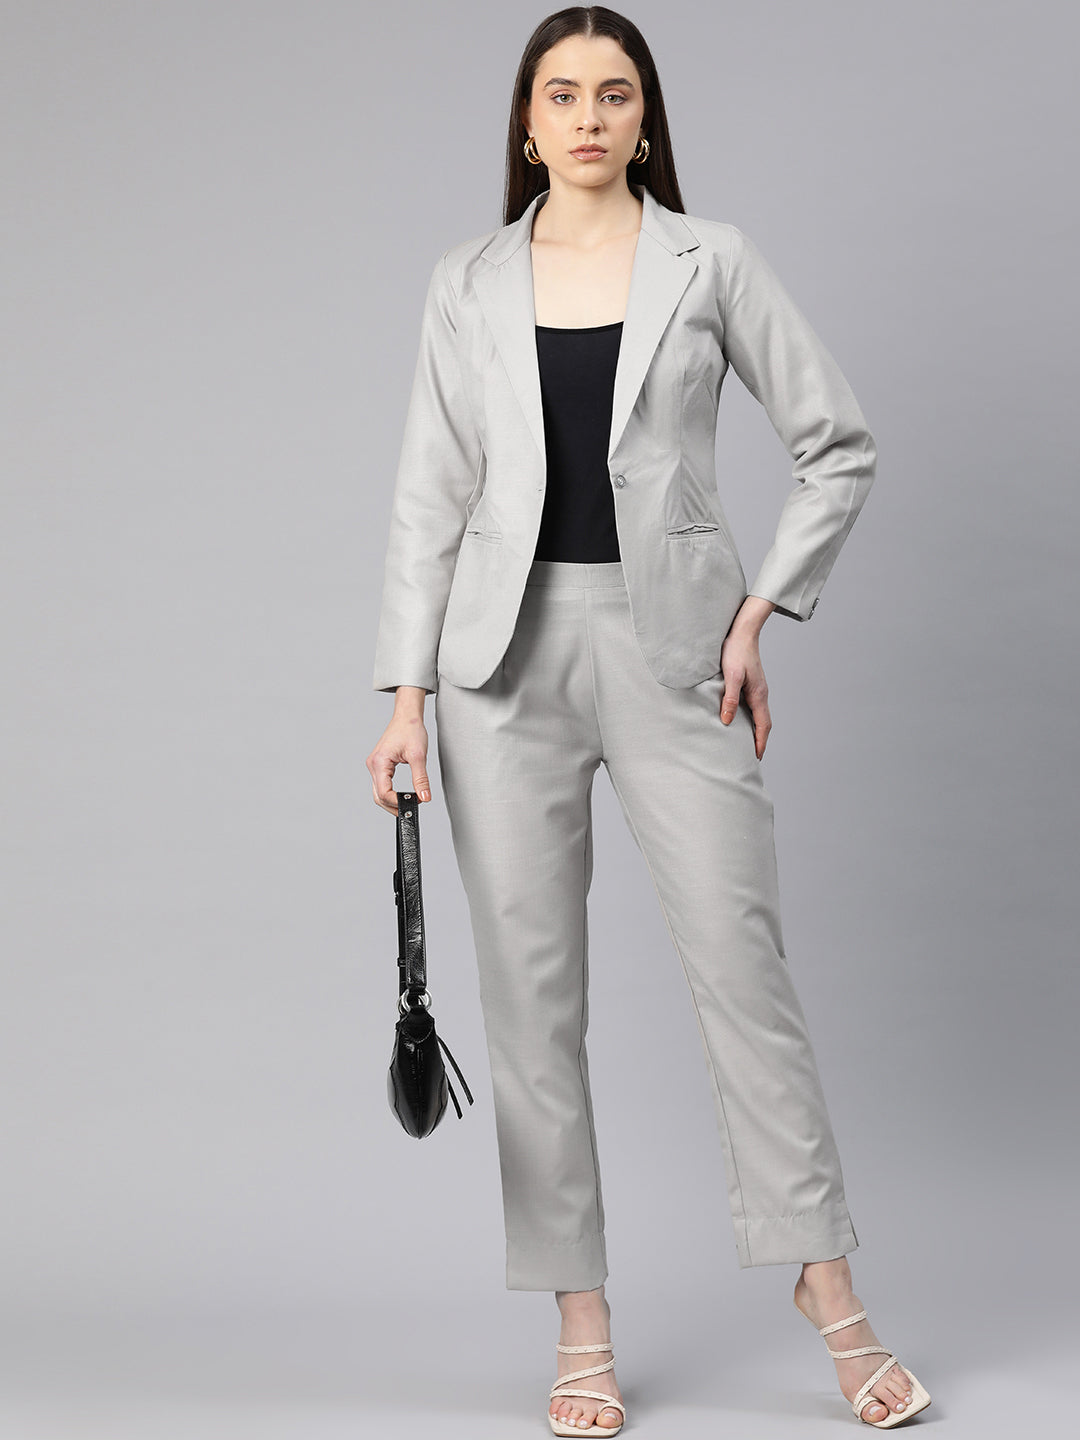 Cottinfab Women Single-Breasted Two-Piece Formal Suit